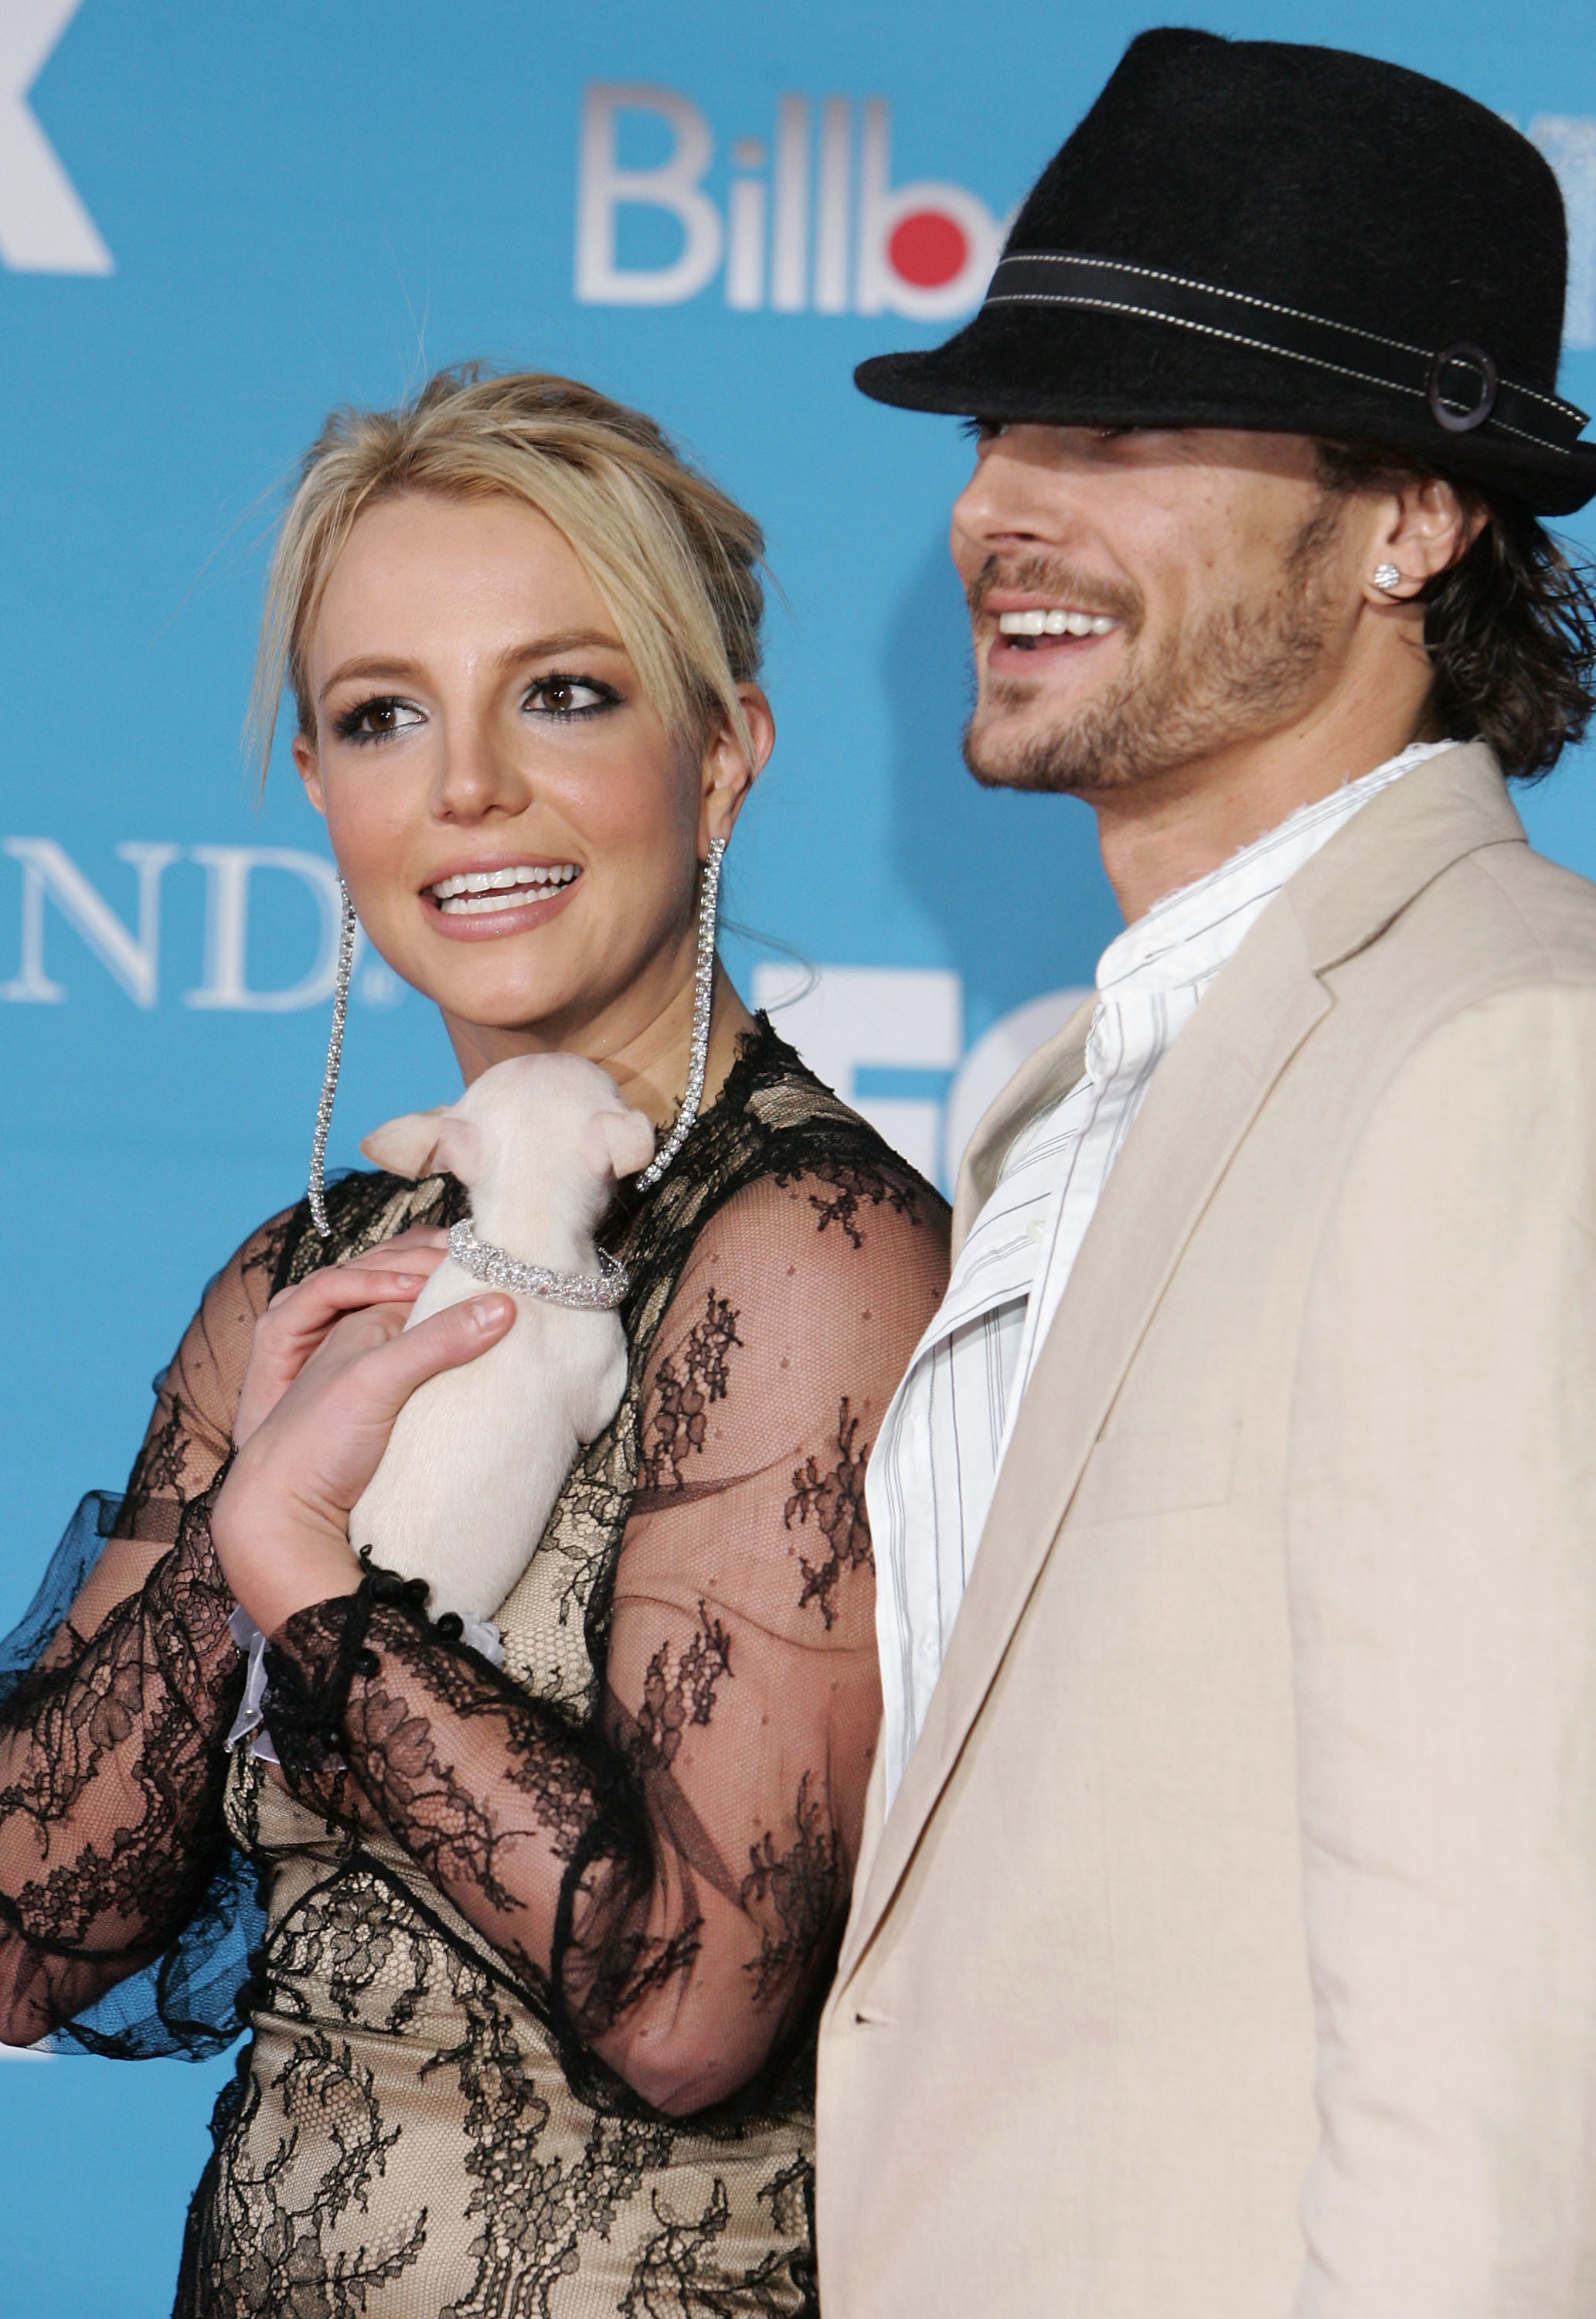 They&#x27;re smiling at a media event; she&#x27;s holding a small dog and wearing a lacy, long-sleeved outfit; he&#x27;s wearing a shirt and suit jacket